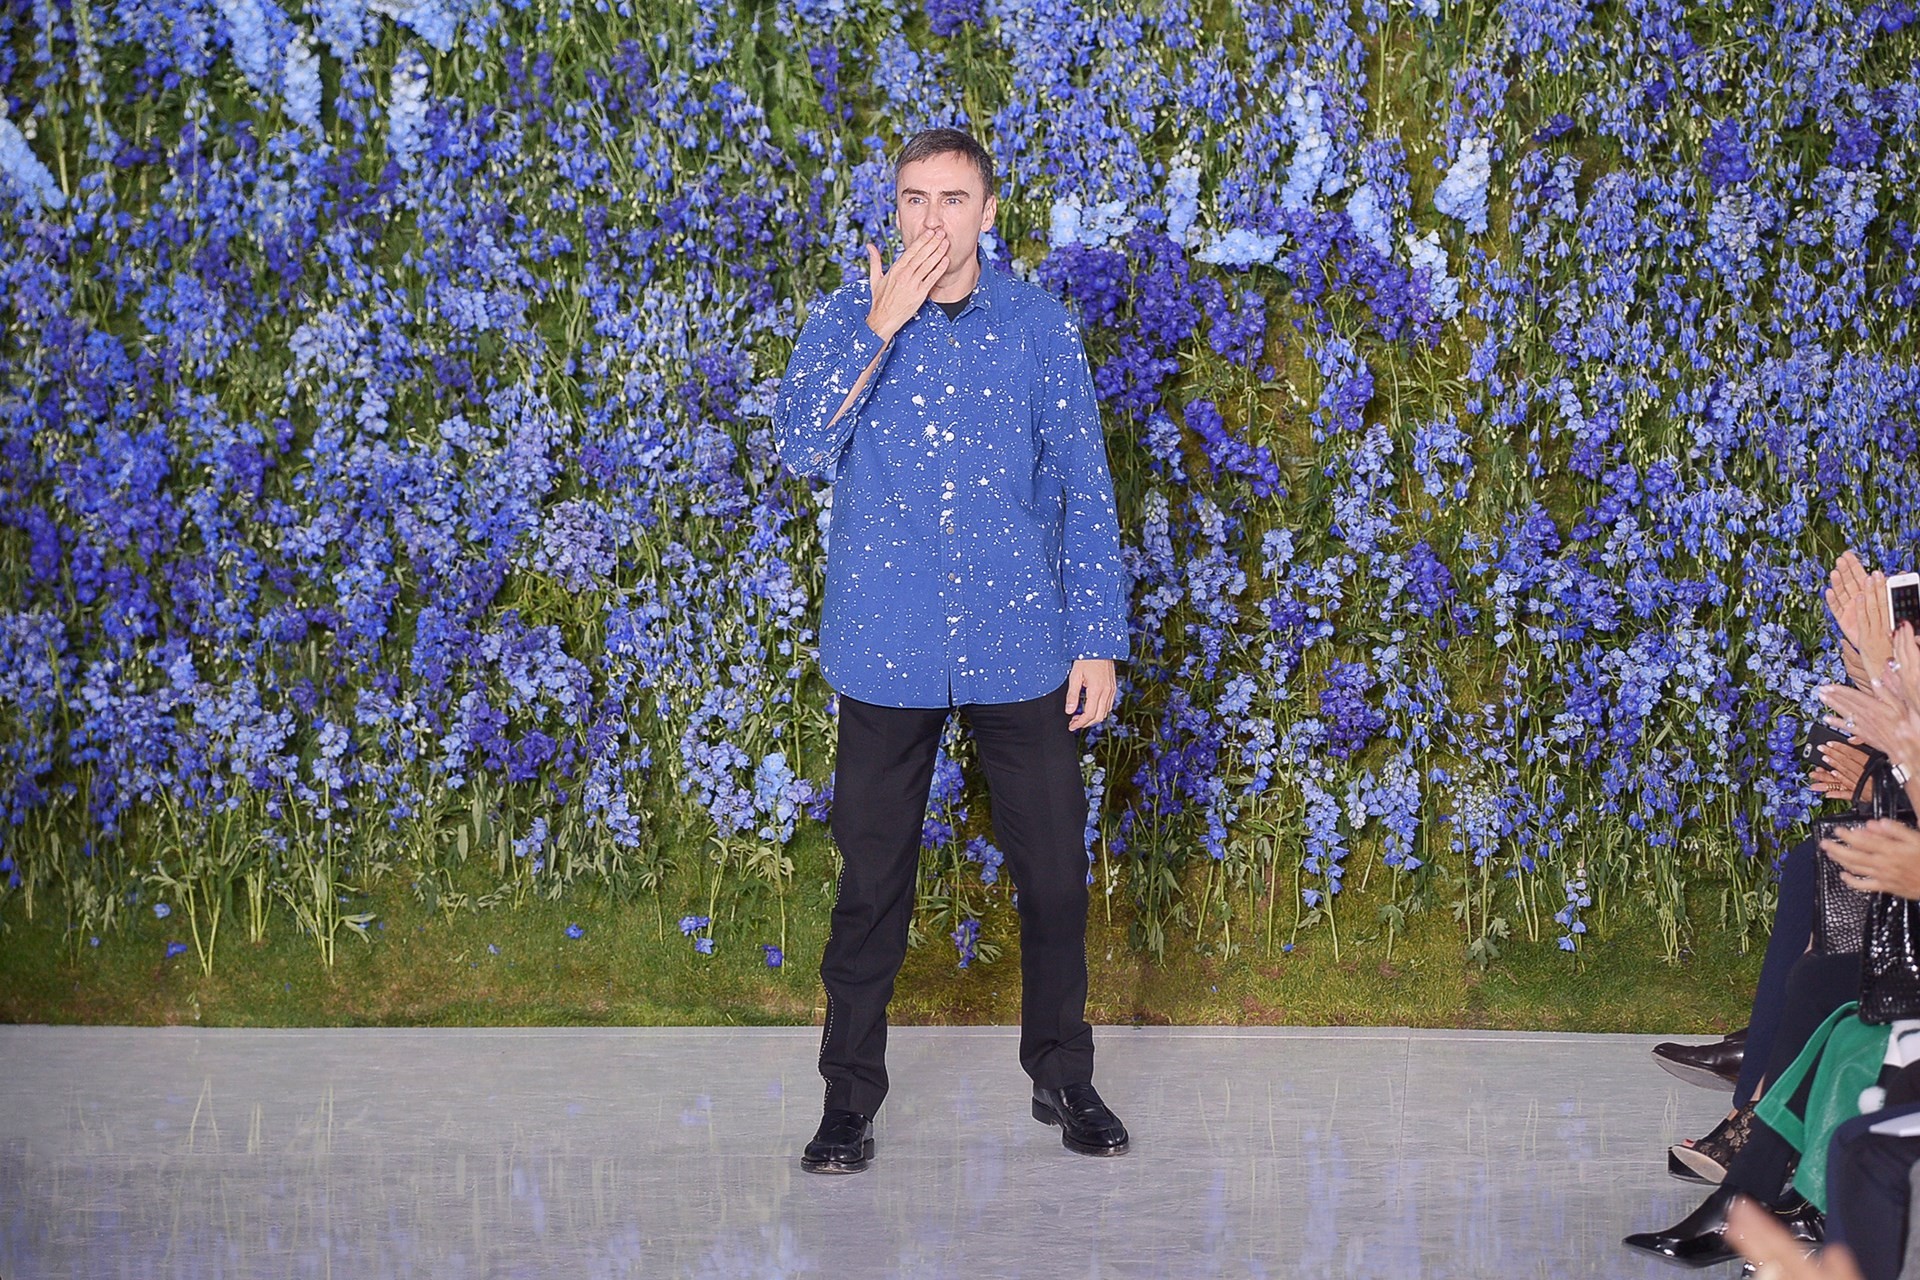 Raf Simons and the now-famous 